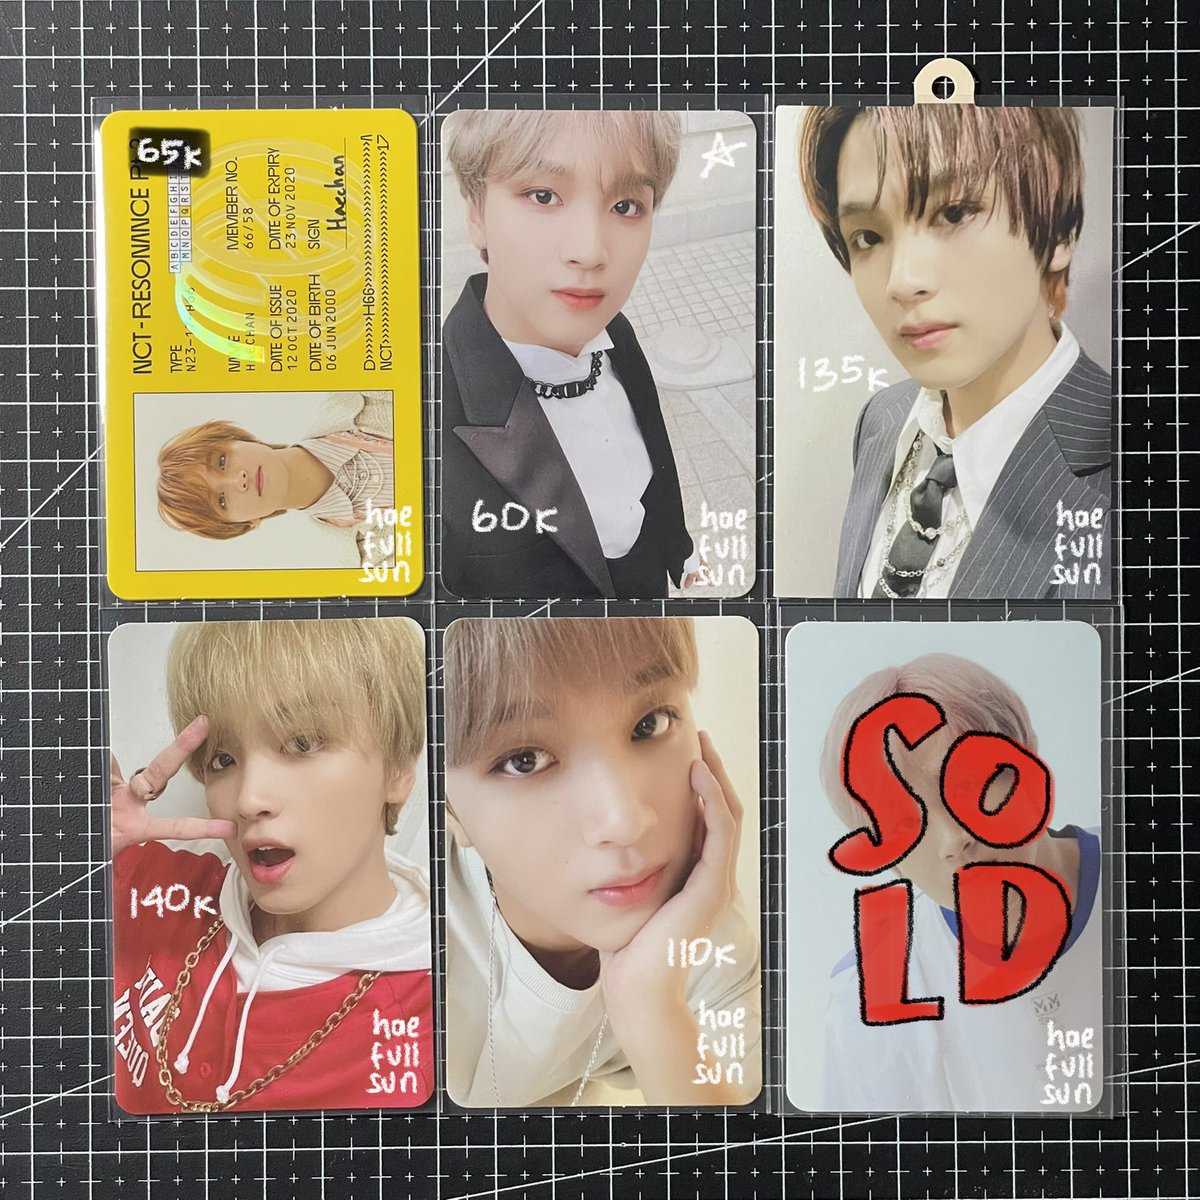 wts / want to sell
aab haechan

id card departure
we boom
photo tag tshirt sanrio x nct
arrival
kihno we boom

good condi, kecuali we boom
price on pict, exc adm + packing
boleh nego tipis
dom jakarta bisa 🍊 keep event

🏷 hc resonance nct2020 nct dream tinychum